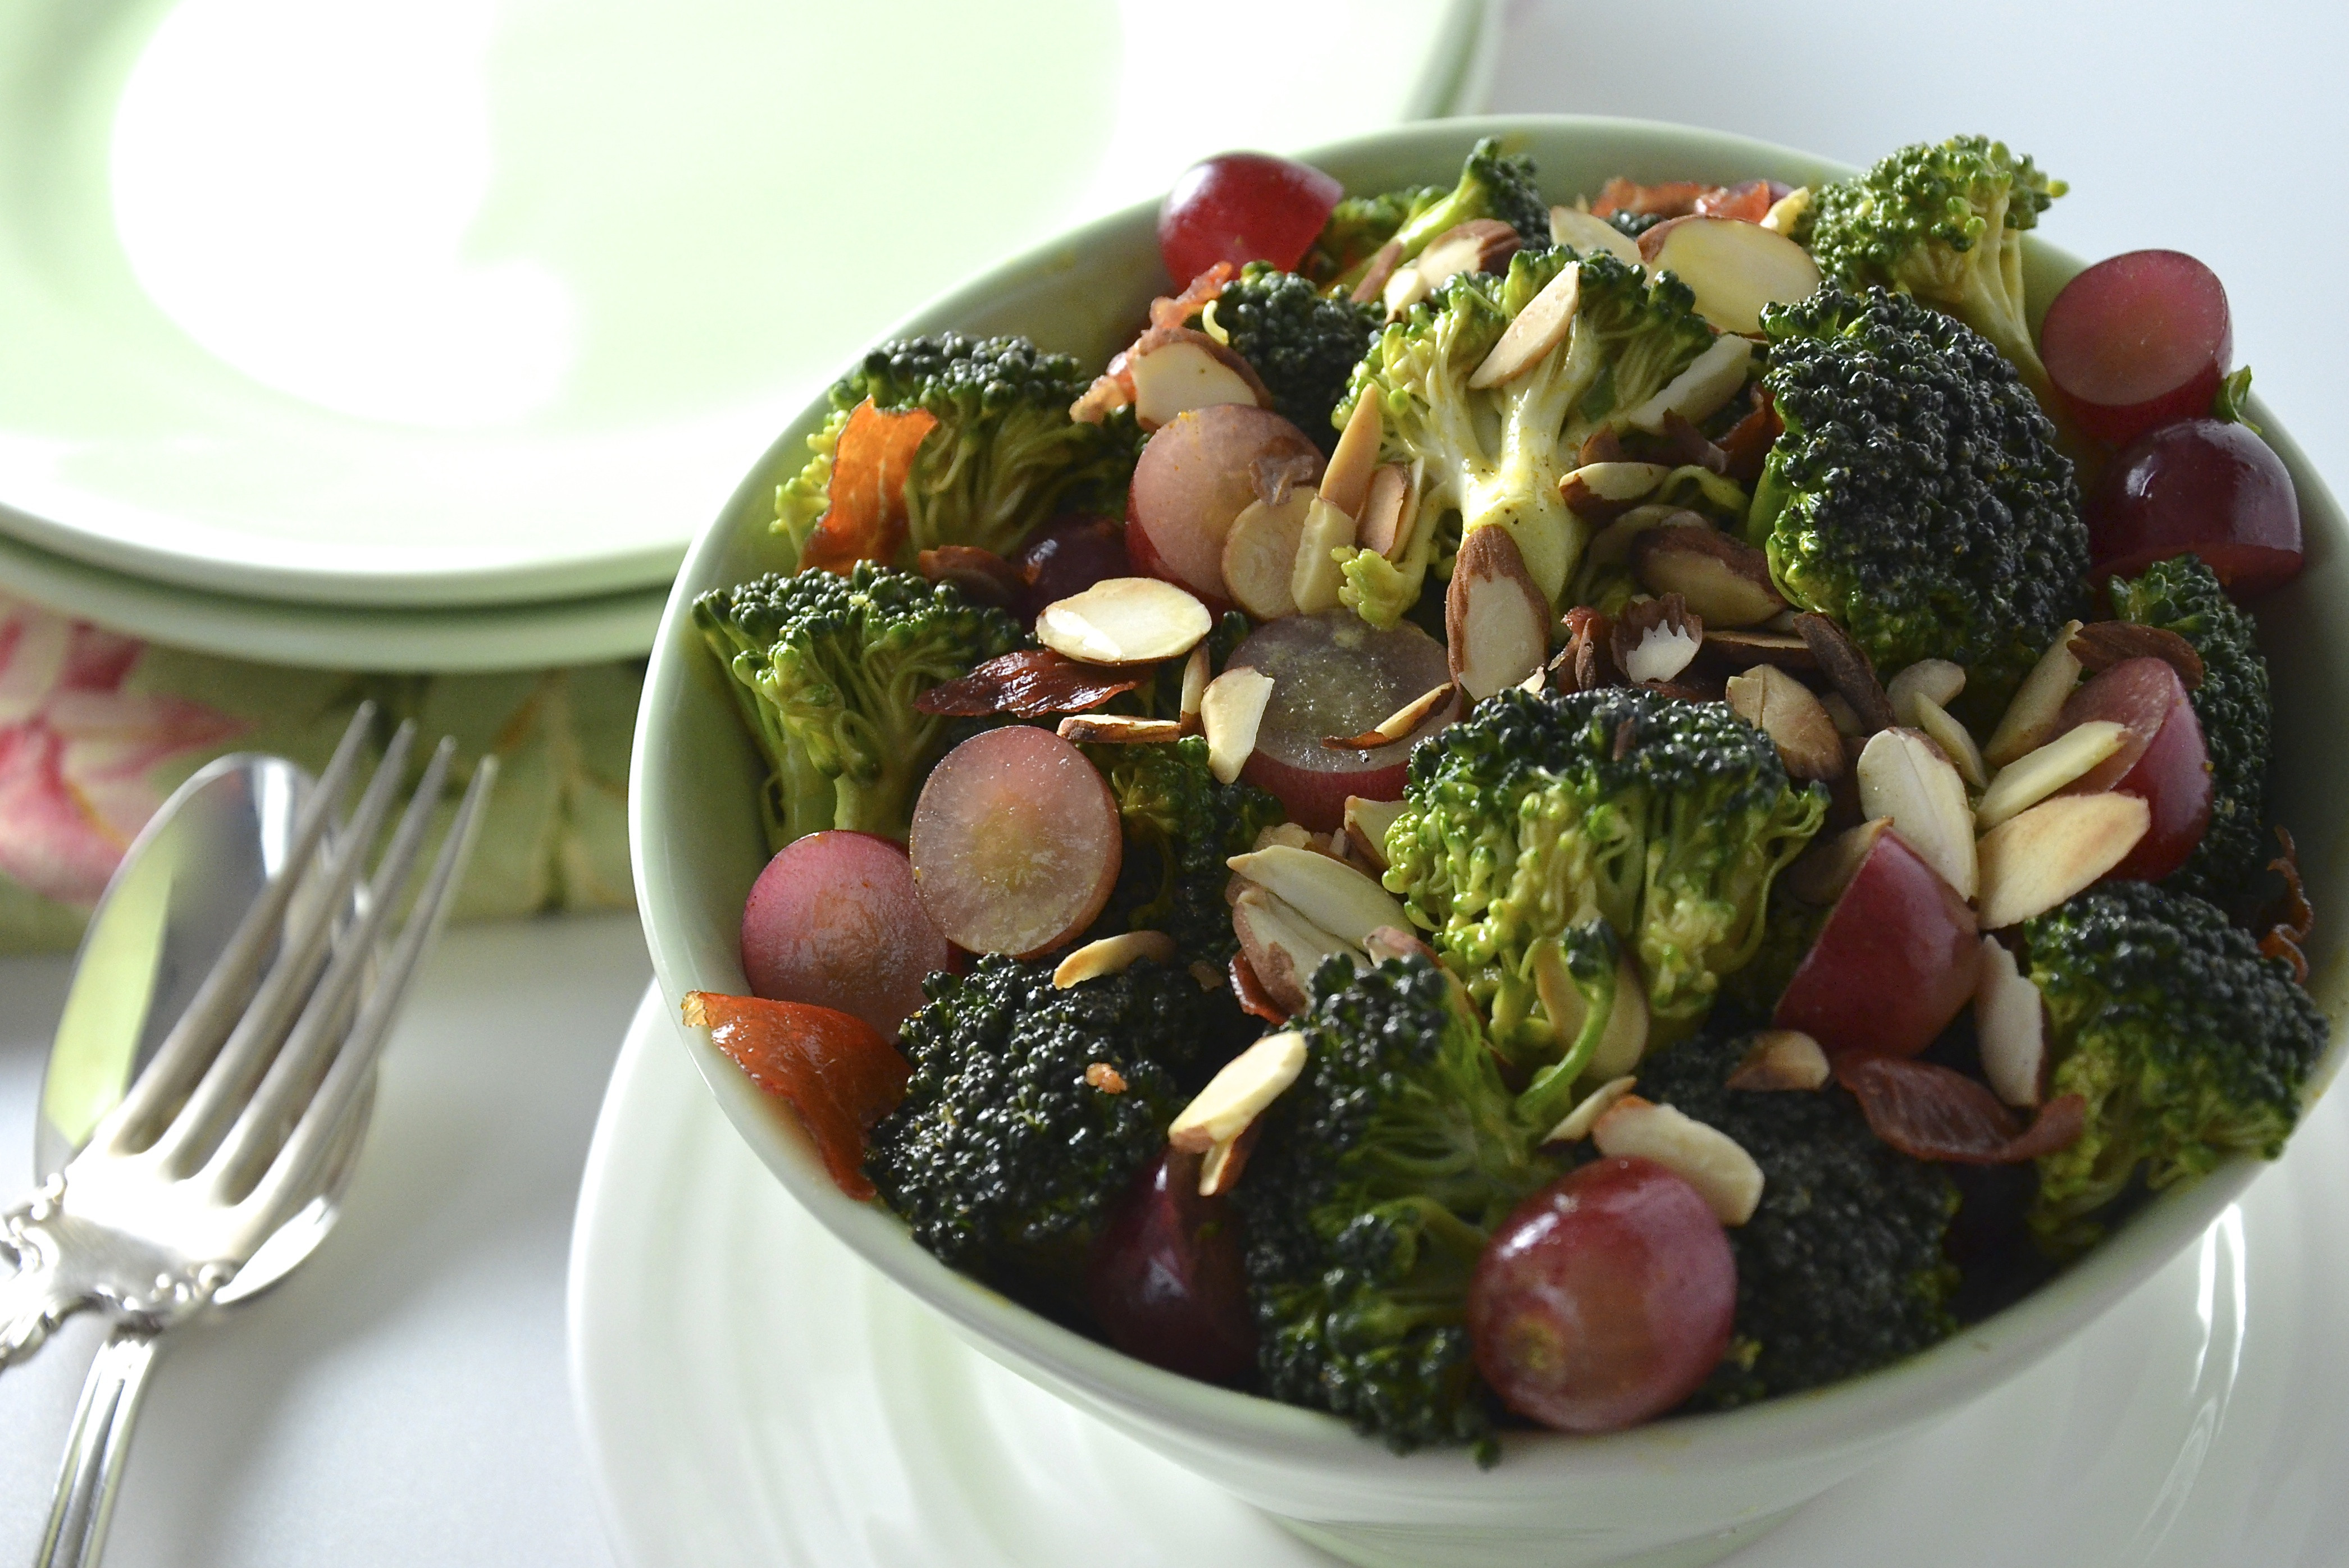 Broccoli Salad With Grapes
 Curry Broccoli Salad with Red Grapes and Almonds